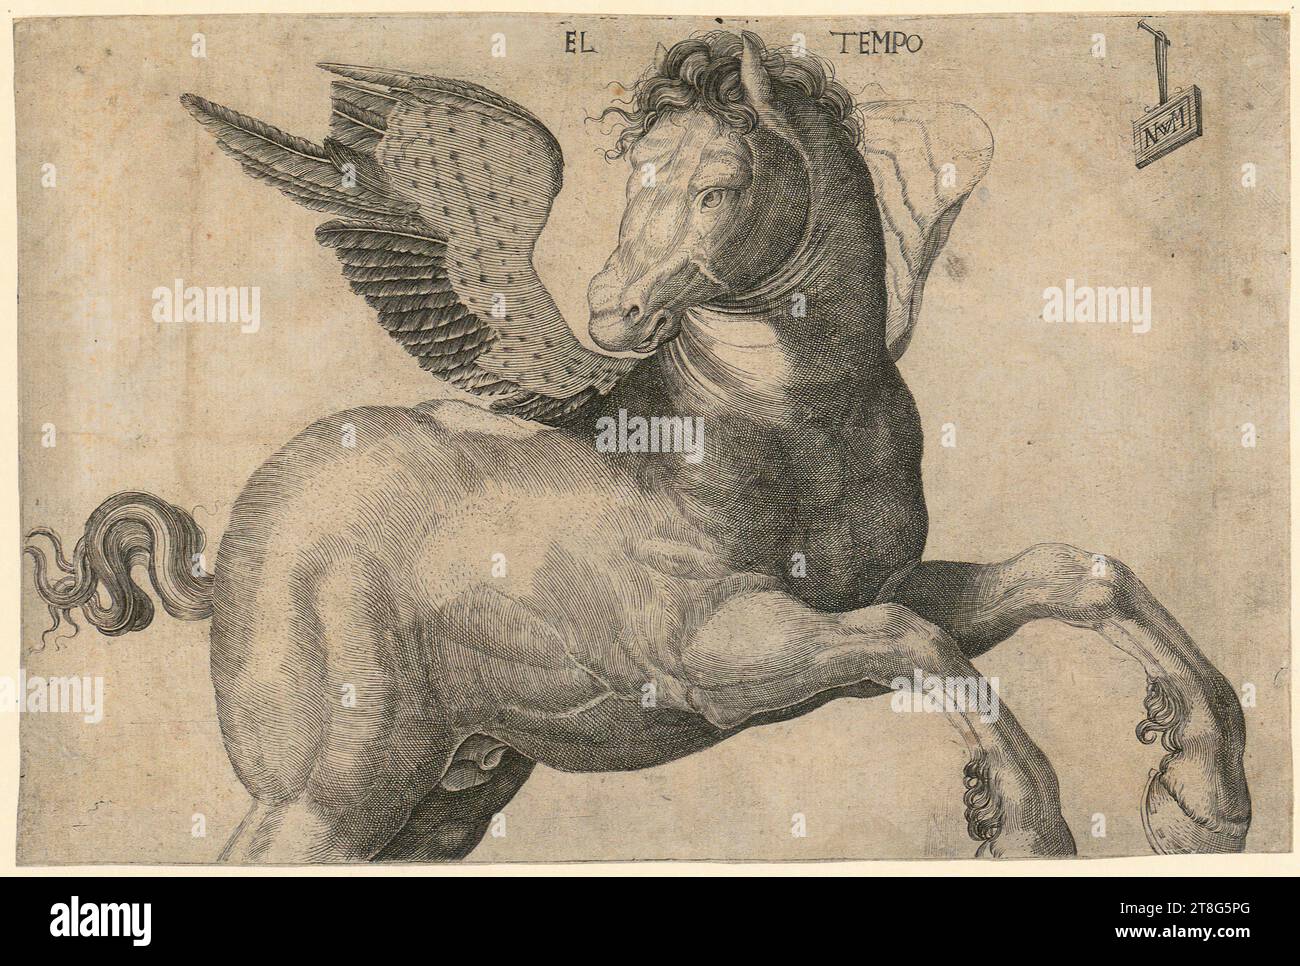 Albrecht Dürer (1471 - 1528), artist, Flight into Egypt, sheet 14 of the series 'The Life of Mary', Albrecht Dürer (1471 - 1528), artist, Flight into Egypt, sheet 14 of the series 'The Life of Mary', monogramist L Nagler IV 860 (1501, 1550 mentioned around), Artist Albrecht Dürer (1471 - 1528), copy after Flight into Egypt, Nicolaus Wilborn (1531, 1538 mentioned around)Jacopo de' Barbari (1460, 1470 around - before 1516), after, Pegasus, origin of the print carrier: 1531 - 1538, copperplate engraving, sheet size: 14. 8 x 22.3 cm Stock Photo